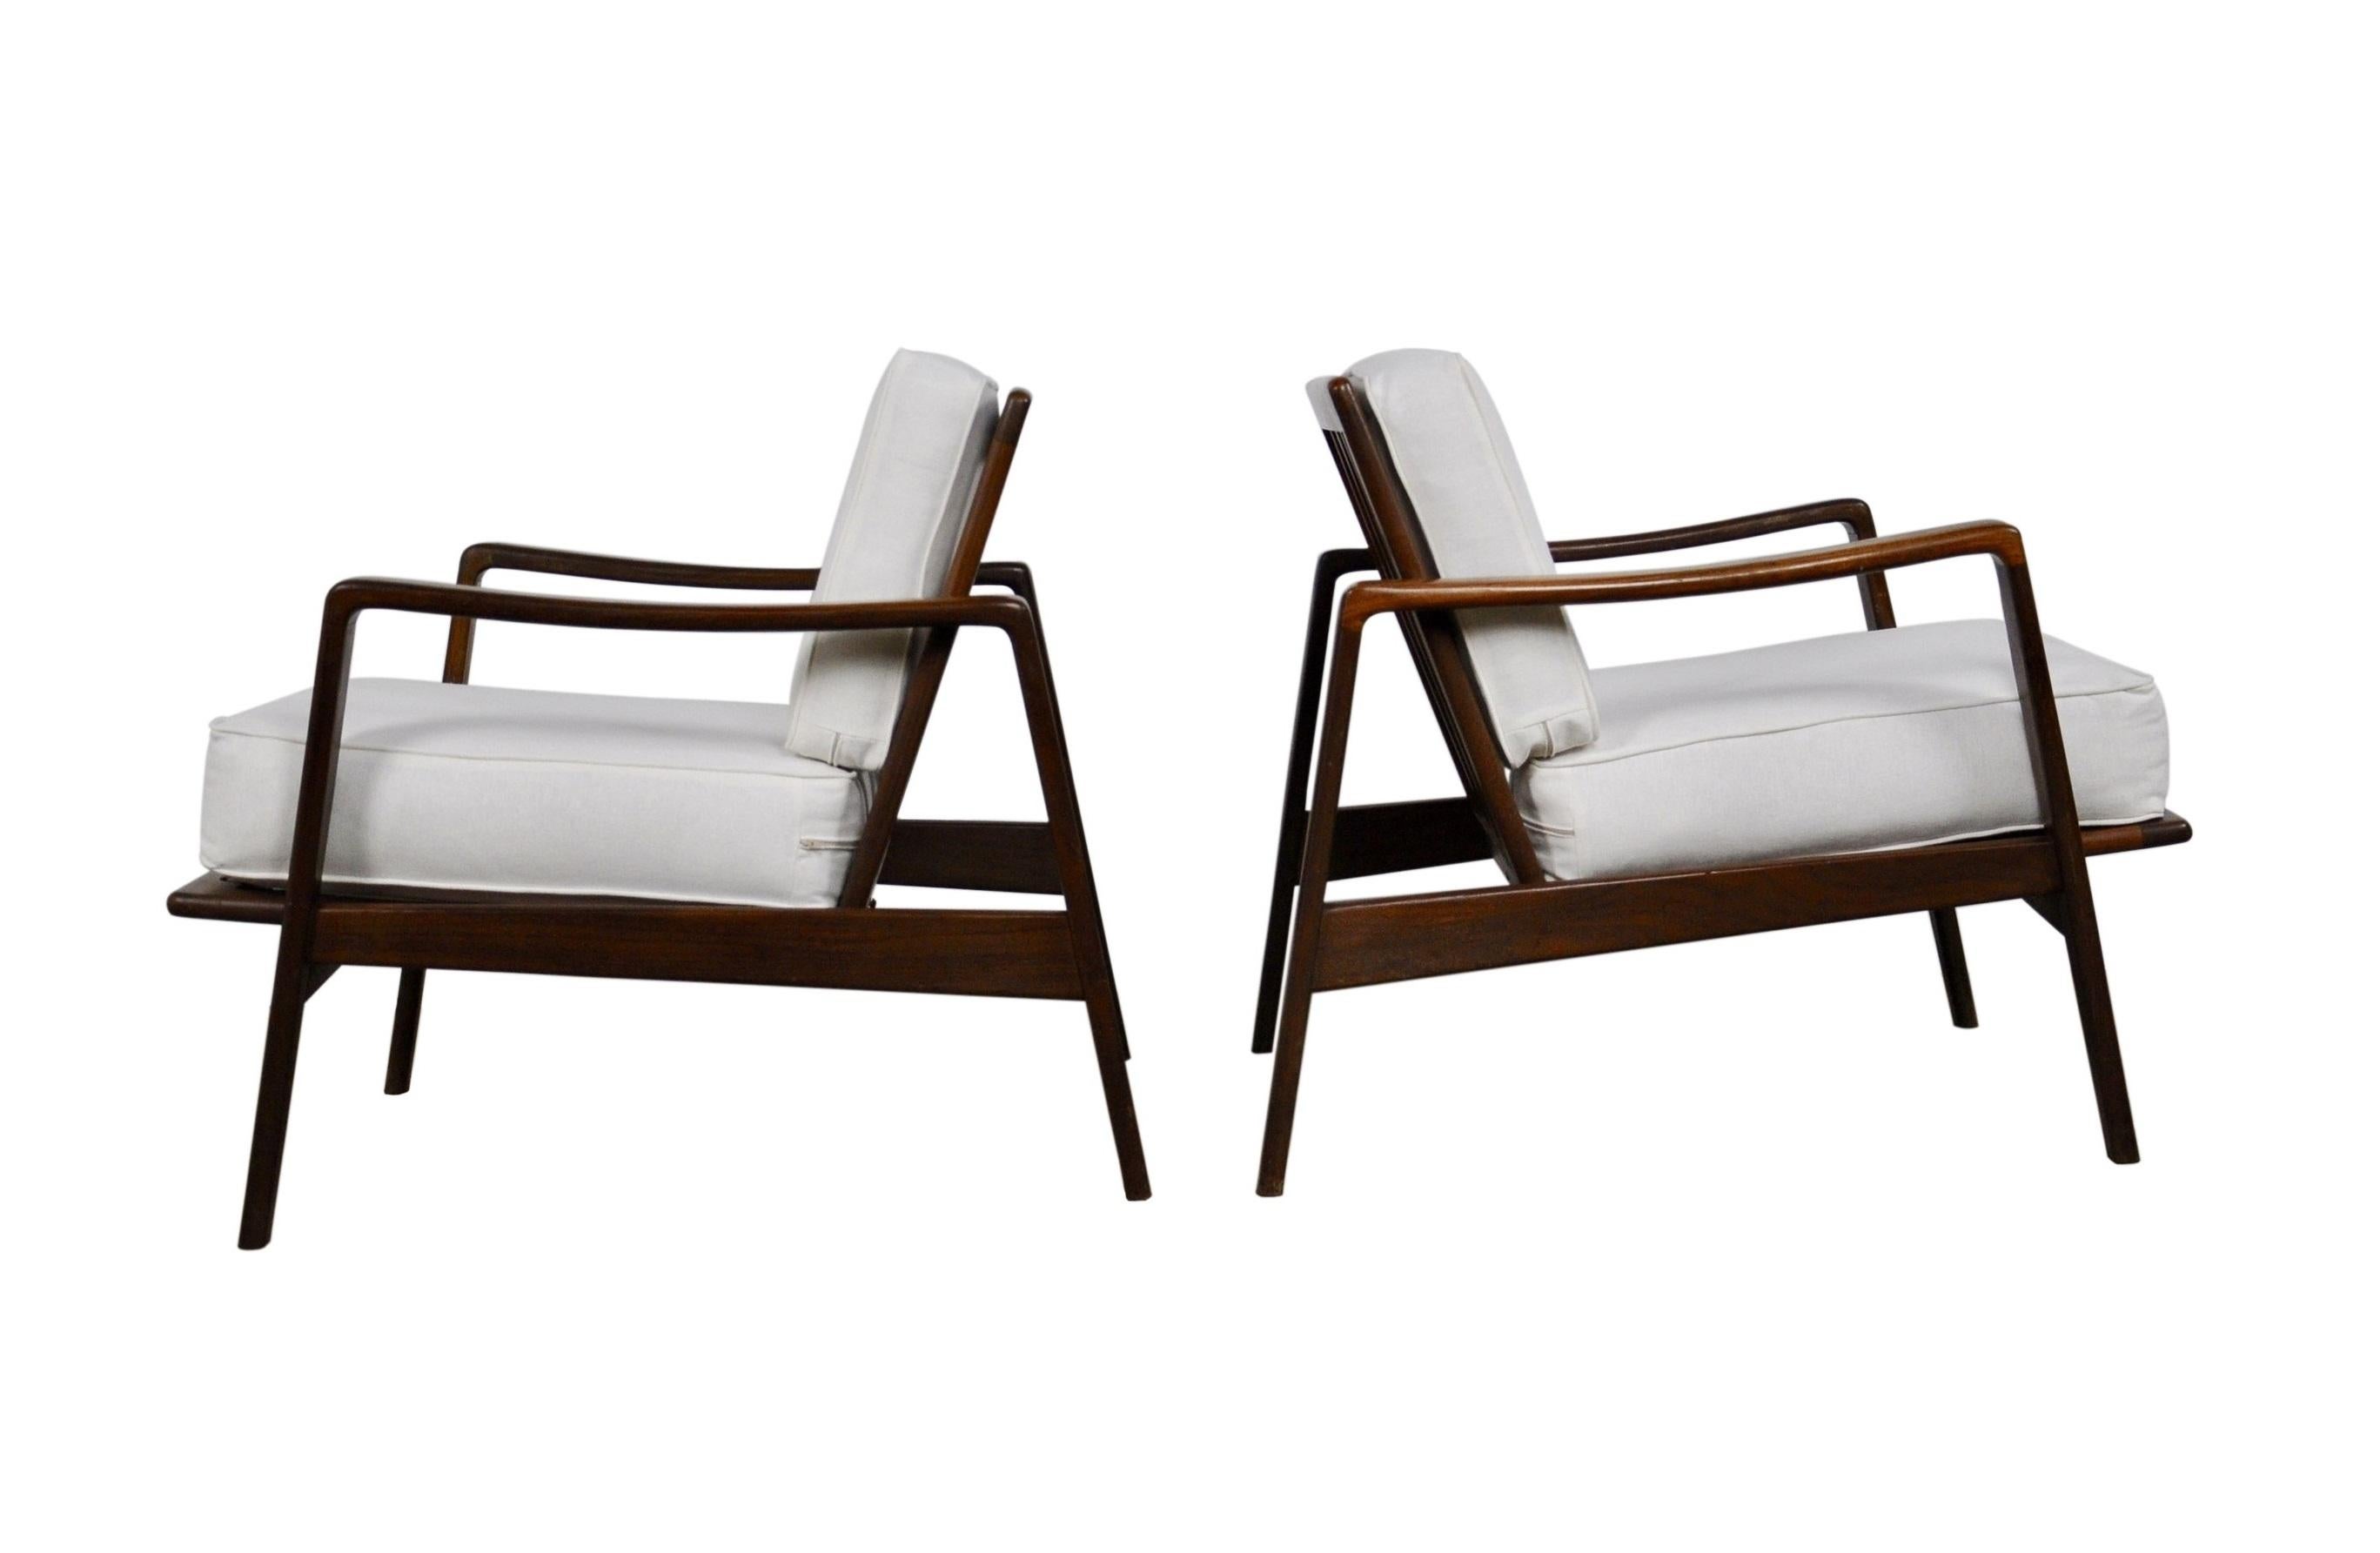 1960's Arne Wahl Iversen Easy Chairs by Komfort, Denmark In Good Condition For Sale In Dallas, TX